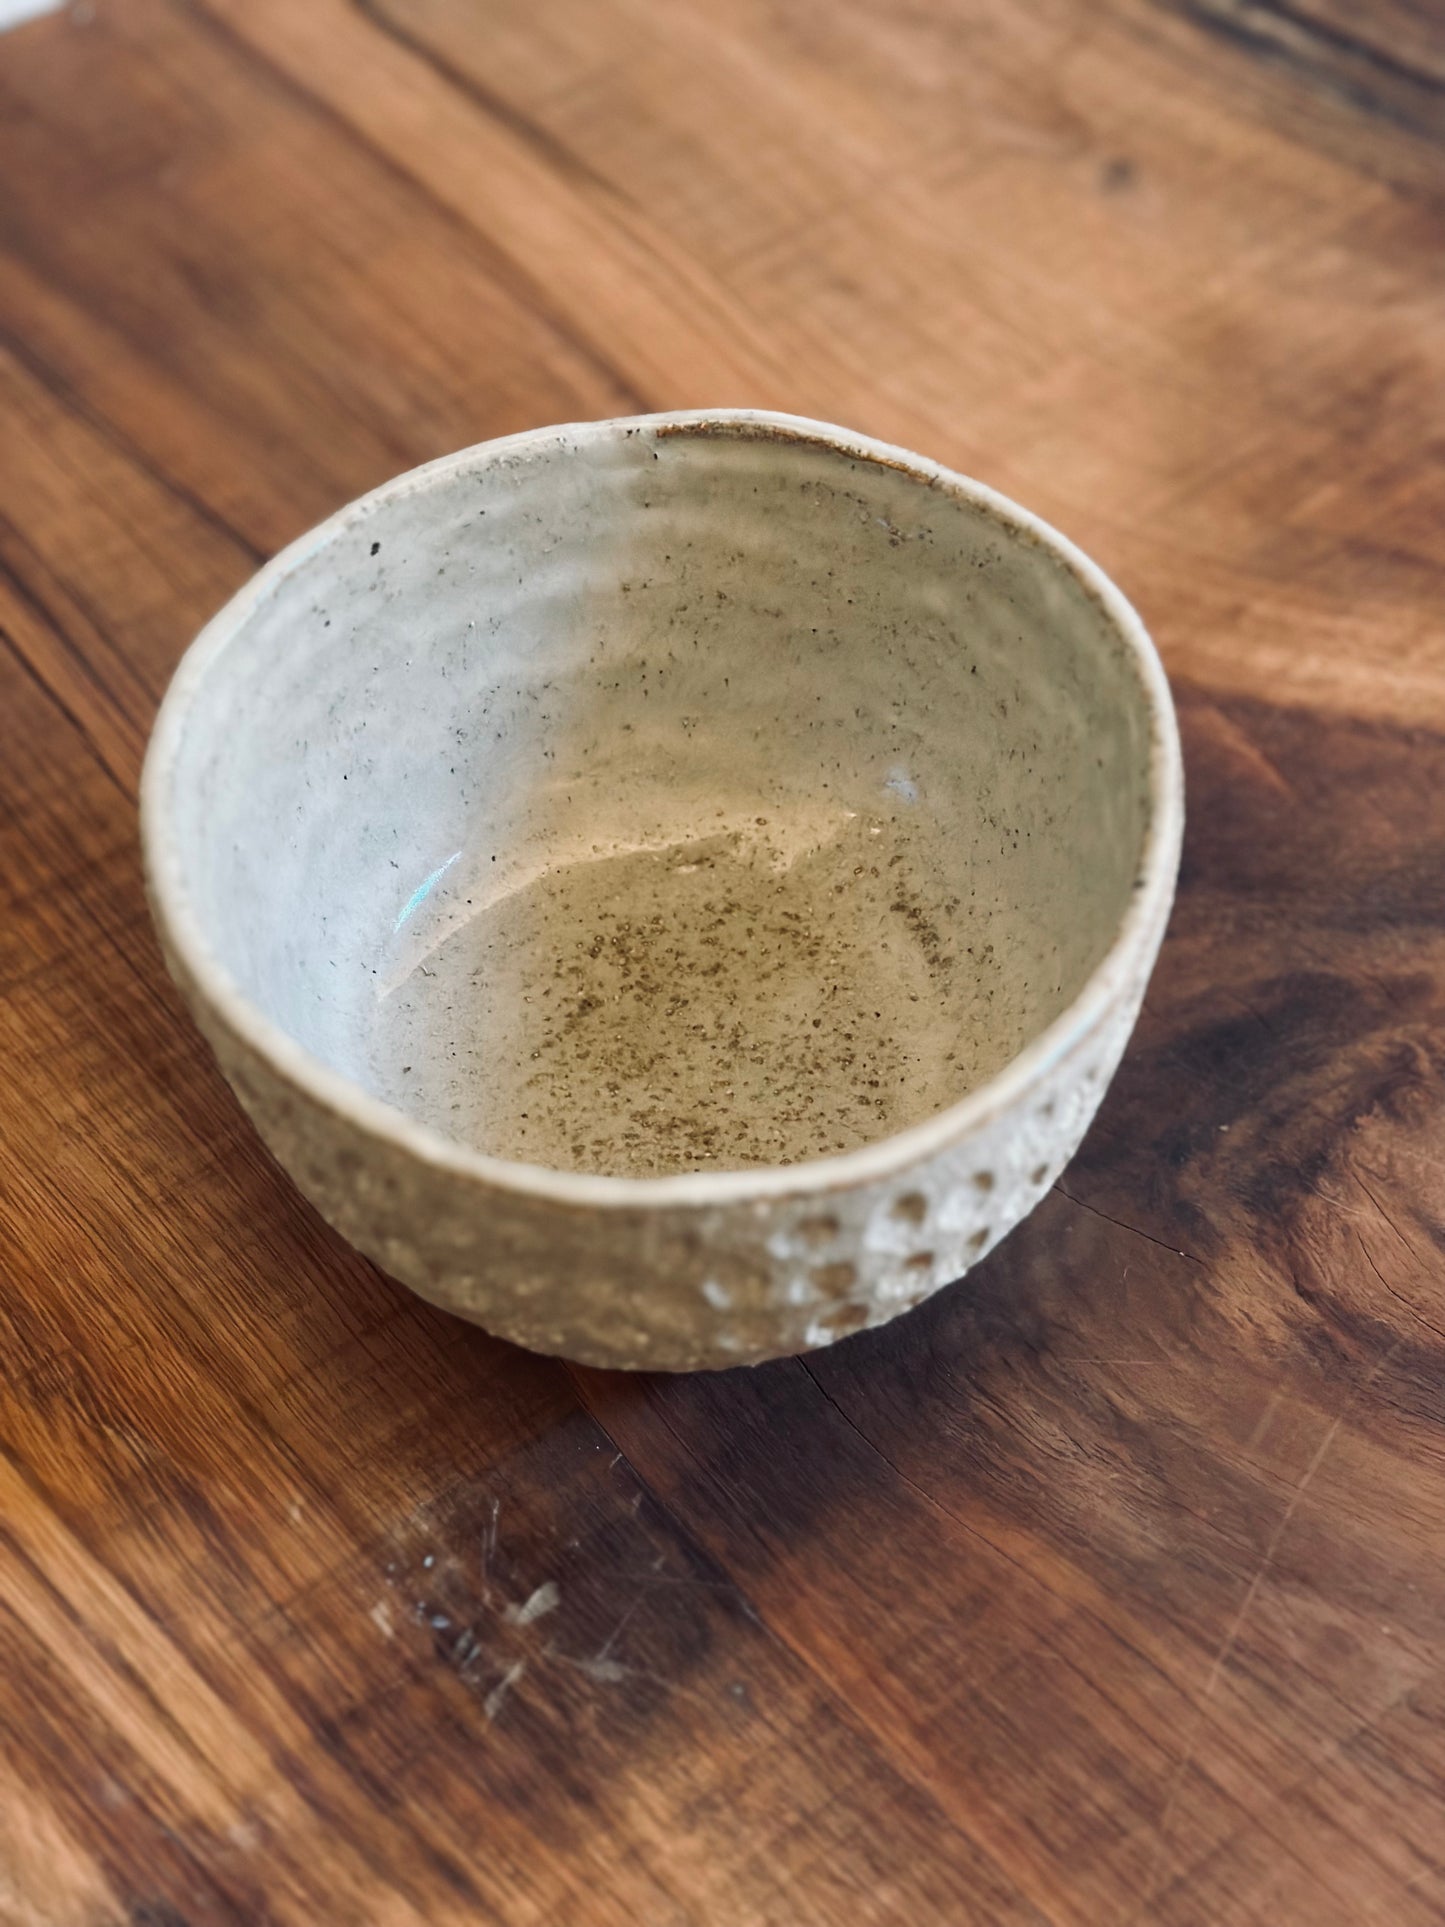 Sand Carved Chawan, Void Ceramics